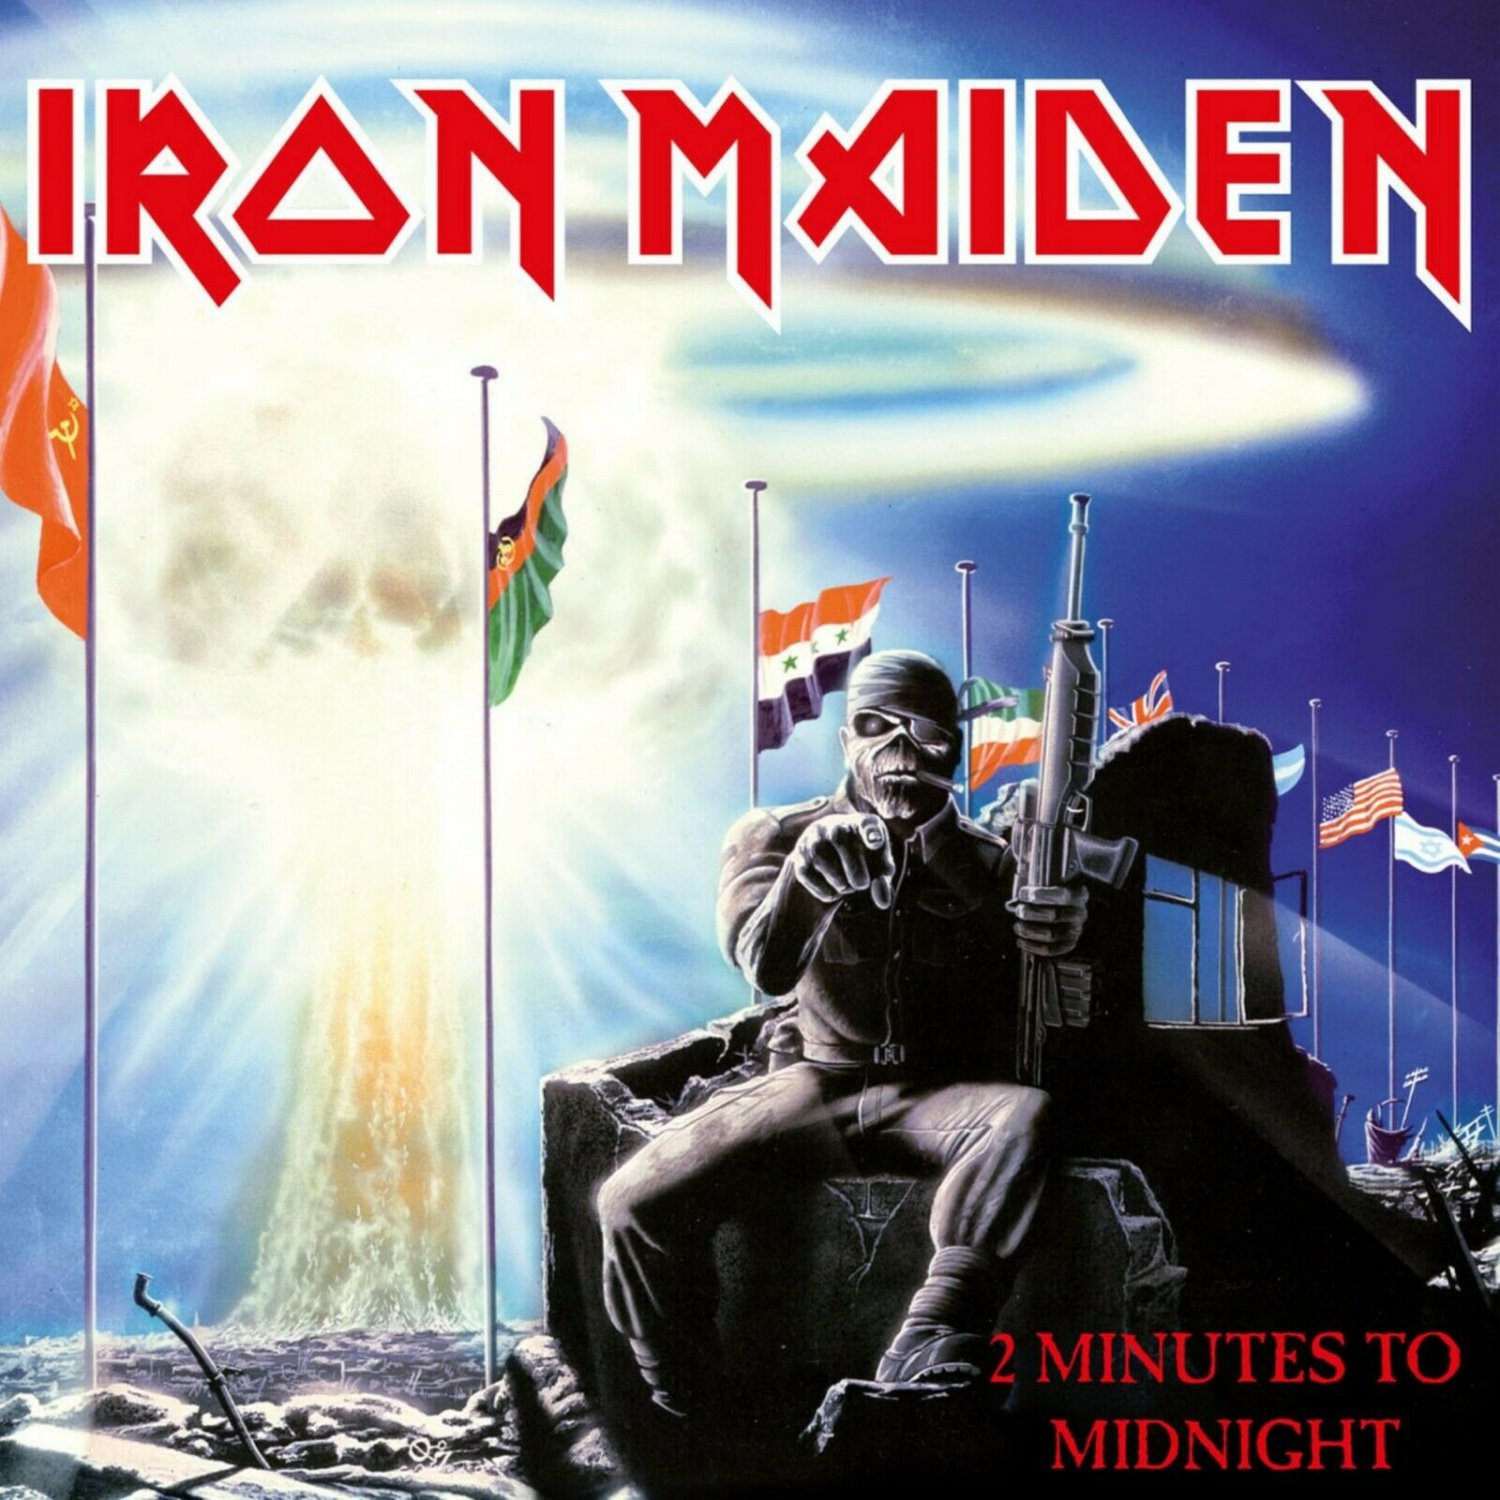 IRON MAIDEN 2 Minutes to Midnight  BANNER Huge 4X4 Ft Fabric Poster Tapestry Flag Print album art